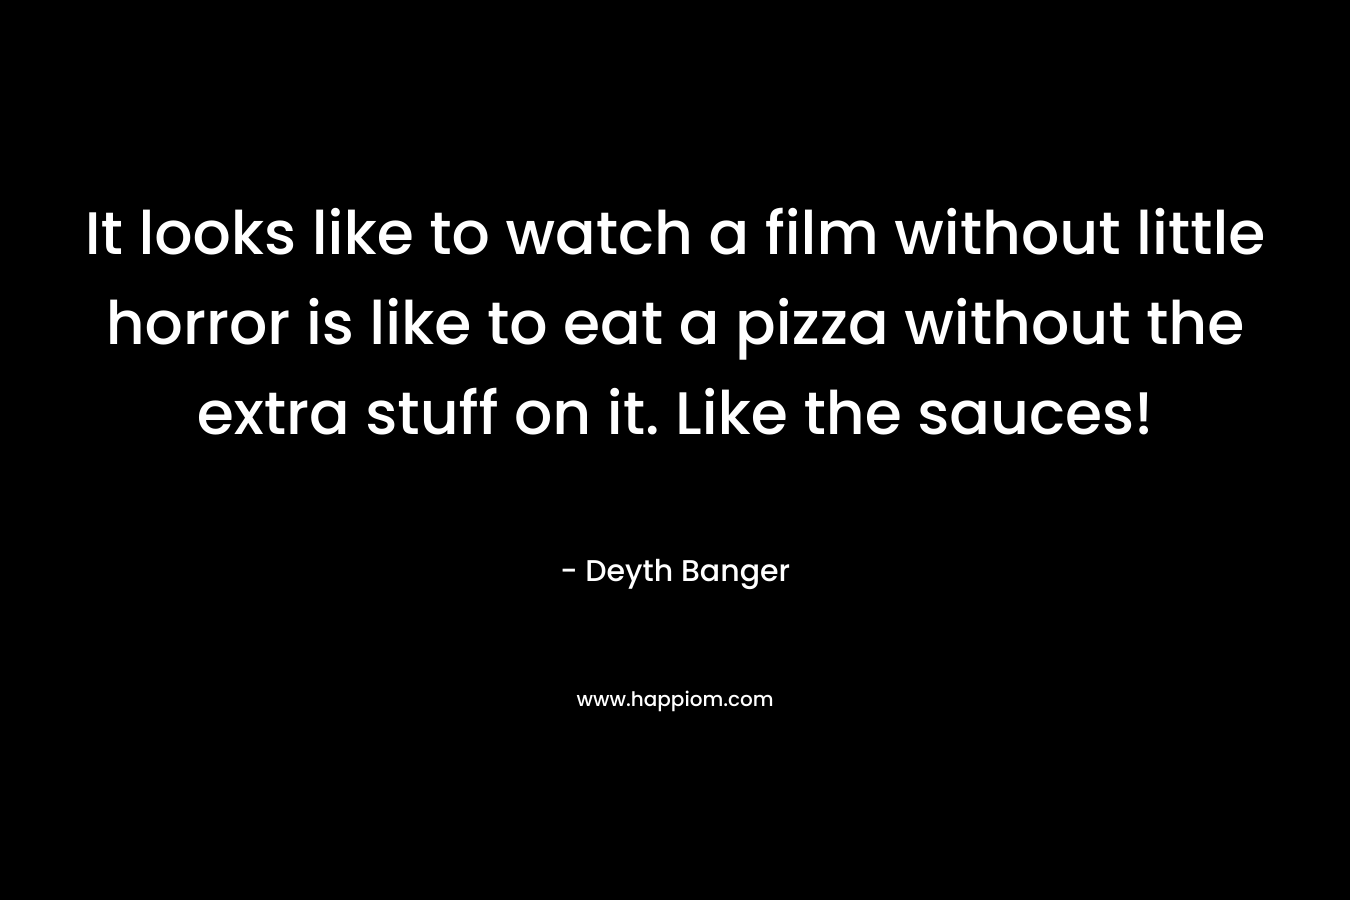 It looks like to watch a film without little horror is like to eat a pizza without the extra stuff on it. Like the sauces! – Deyth Banger